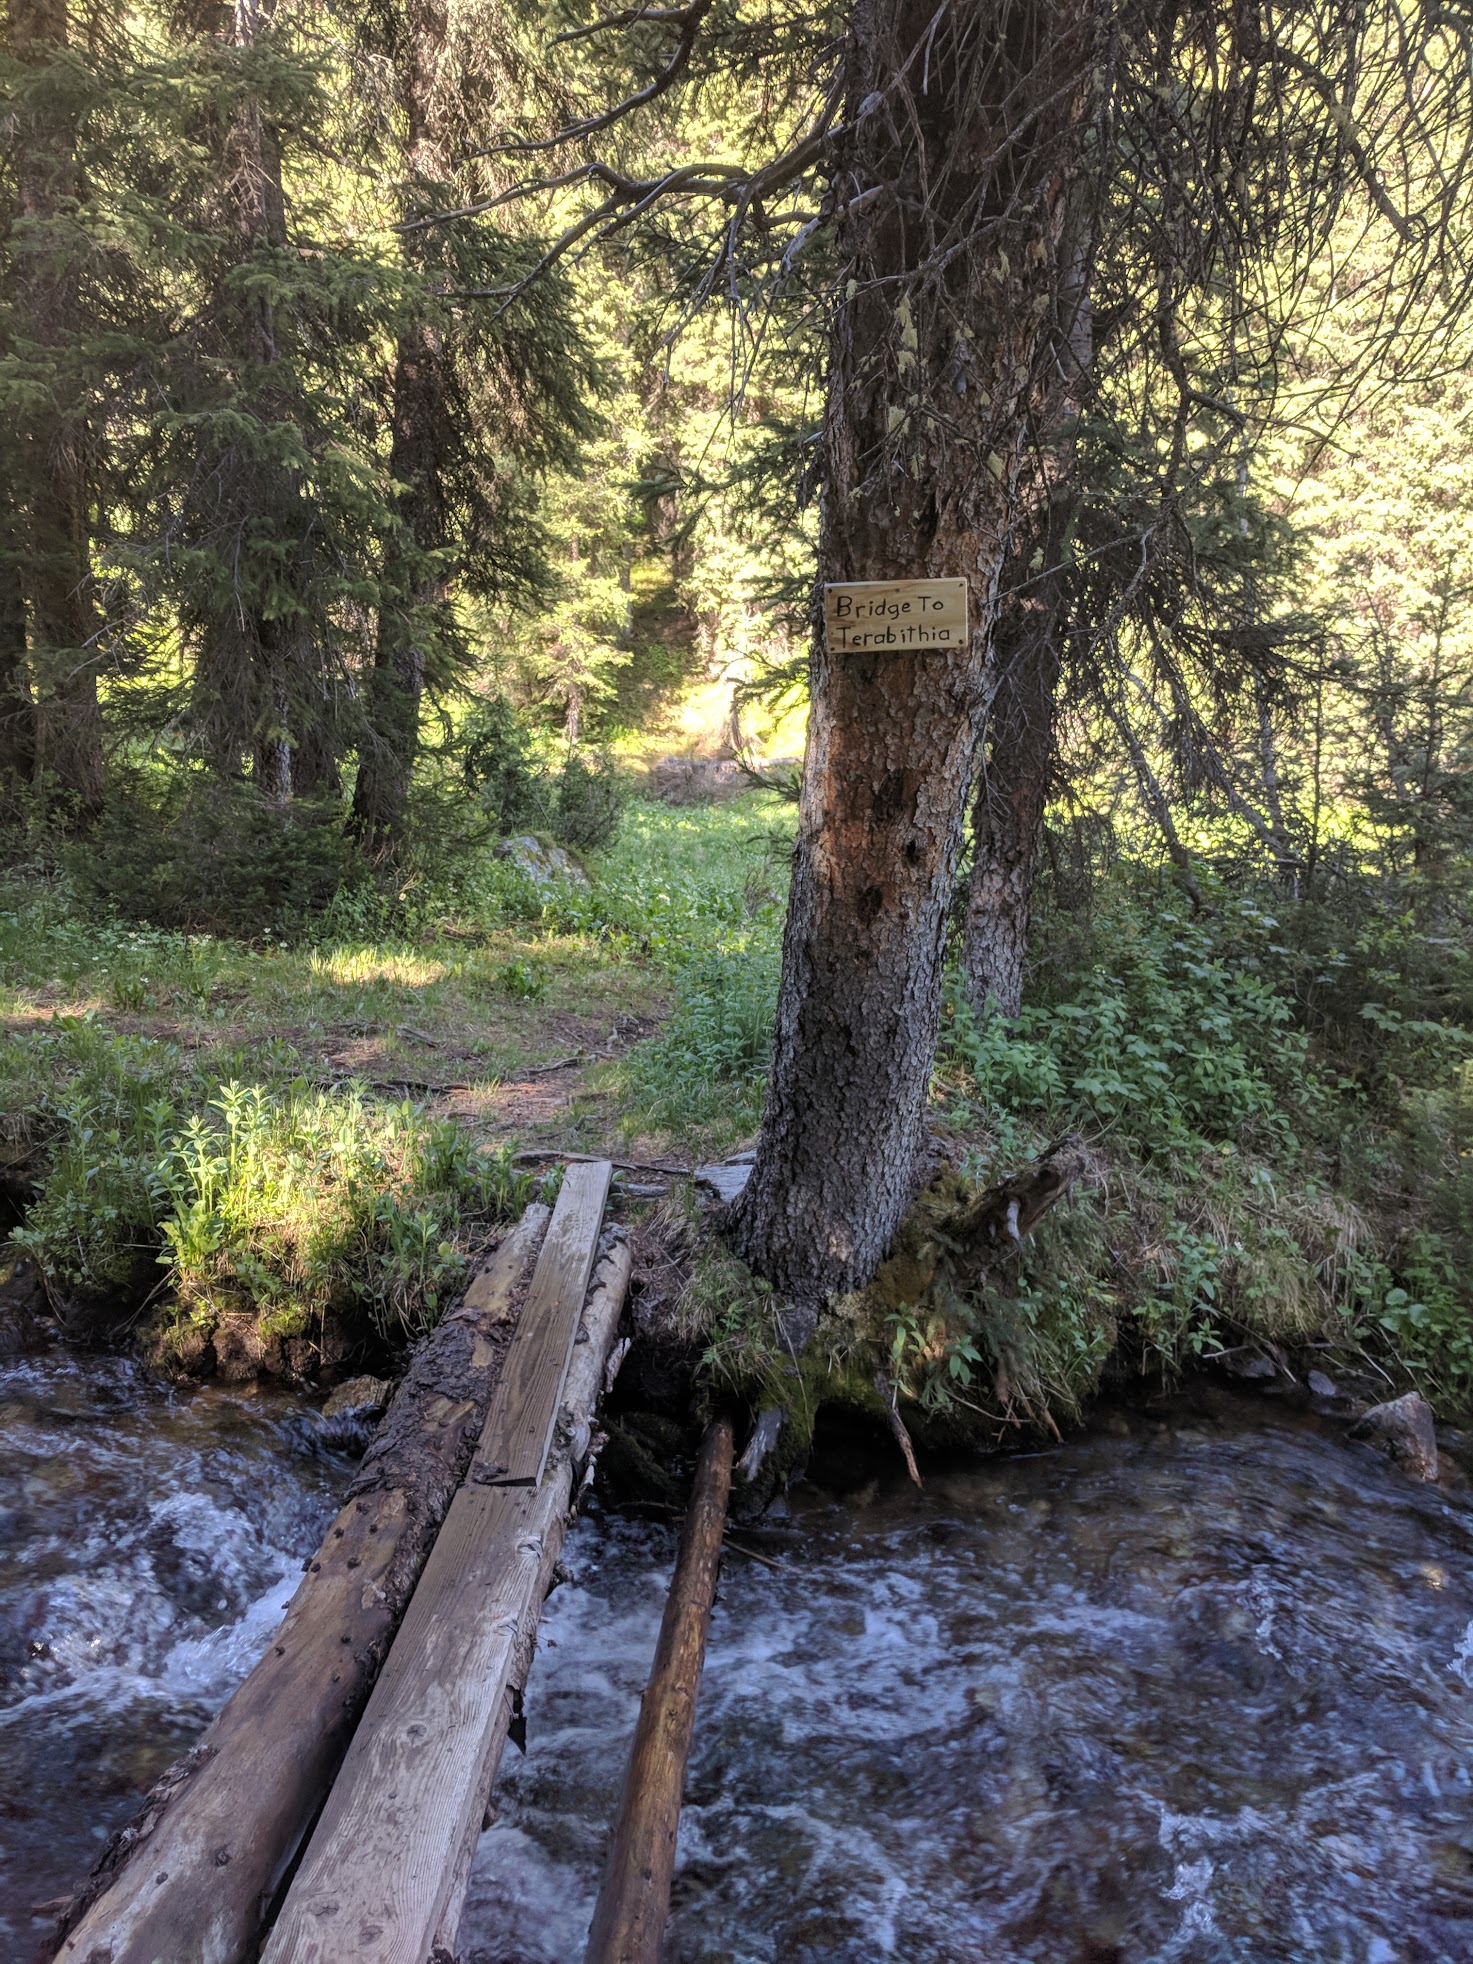 Just to the west of the road at the creek crossing is a small foot bridge with the signage "Bridge to Terabithia"...saved us from the creek crossings.